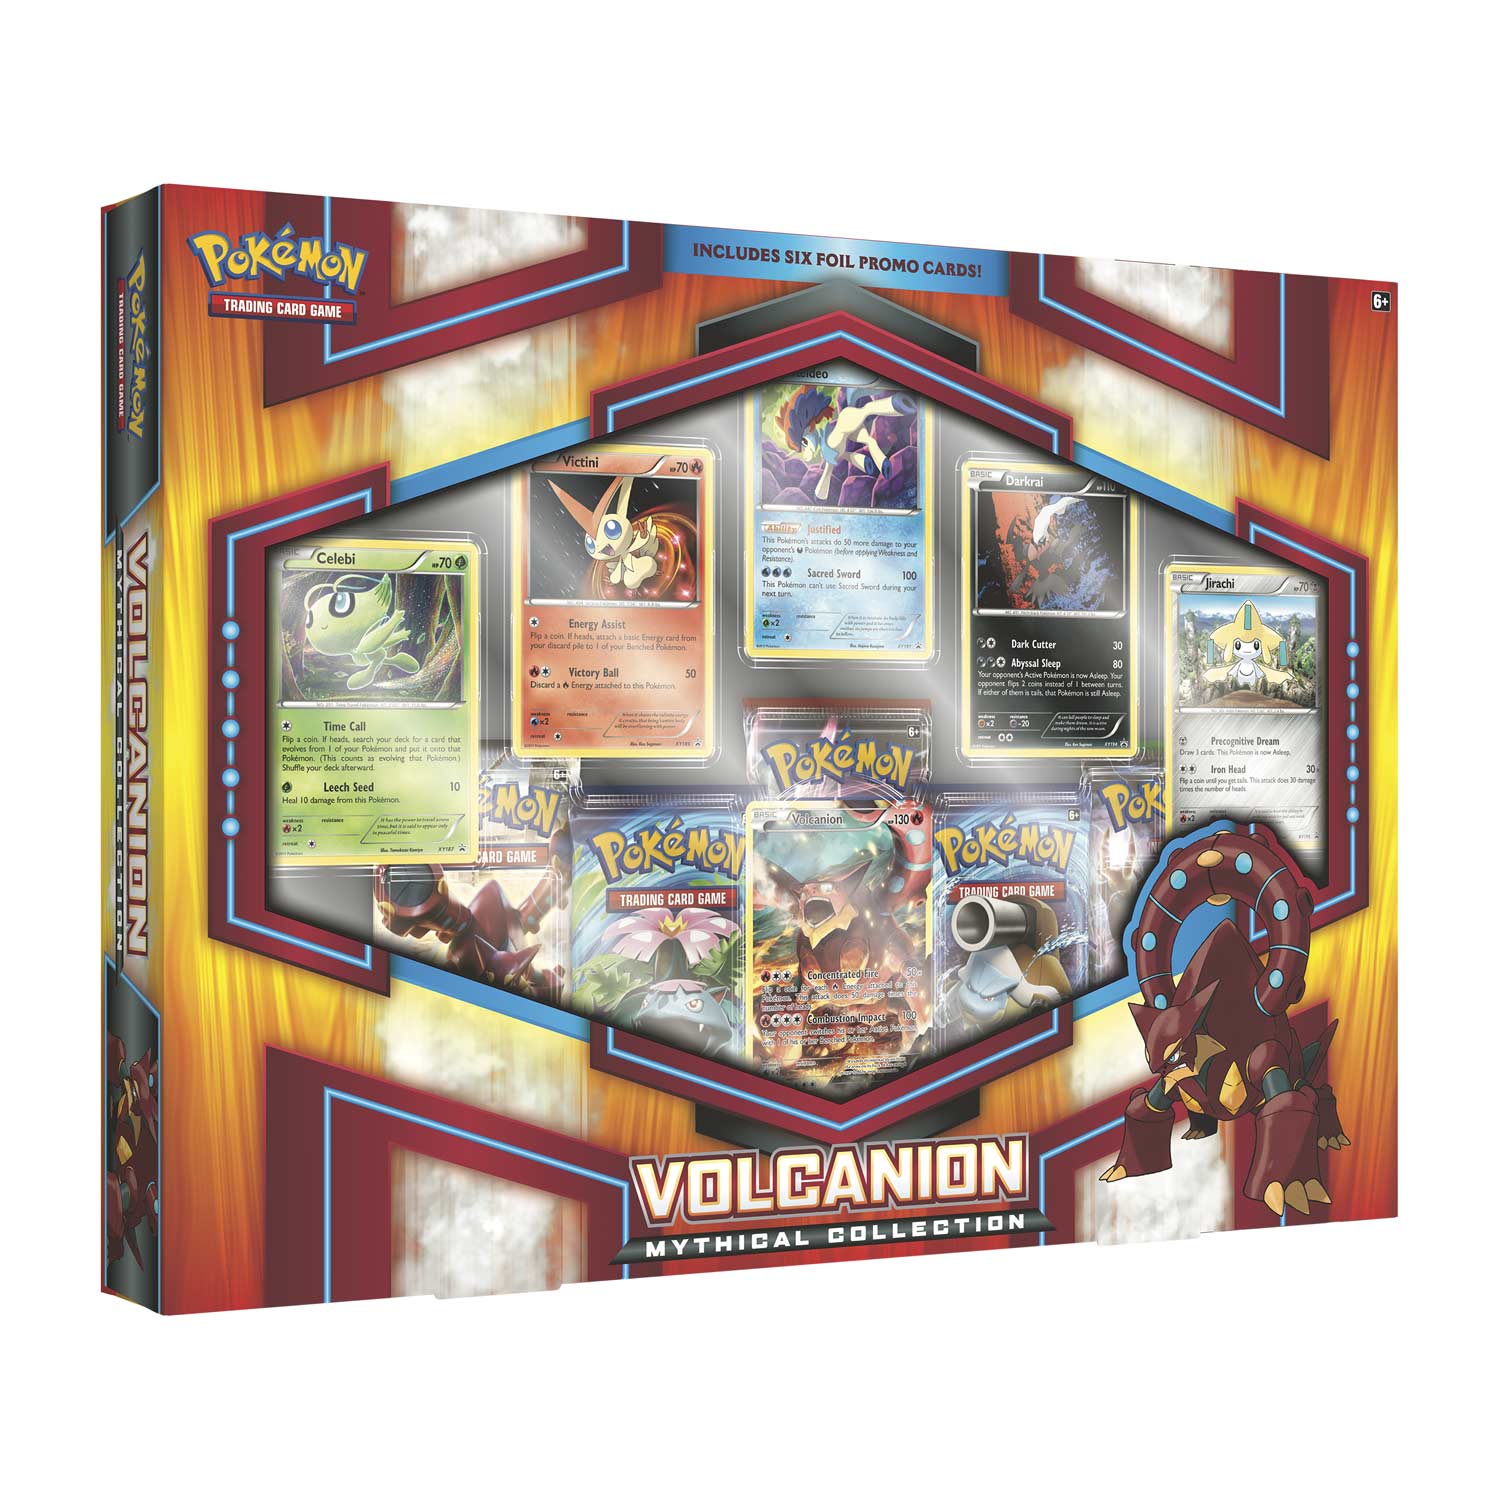 Pokemon Volcanion Mythical Collection Deluxe Box